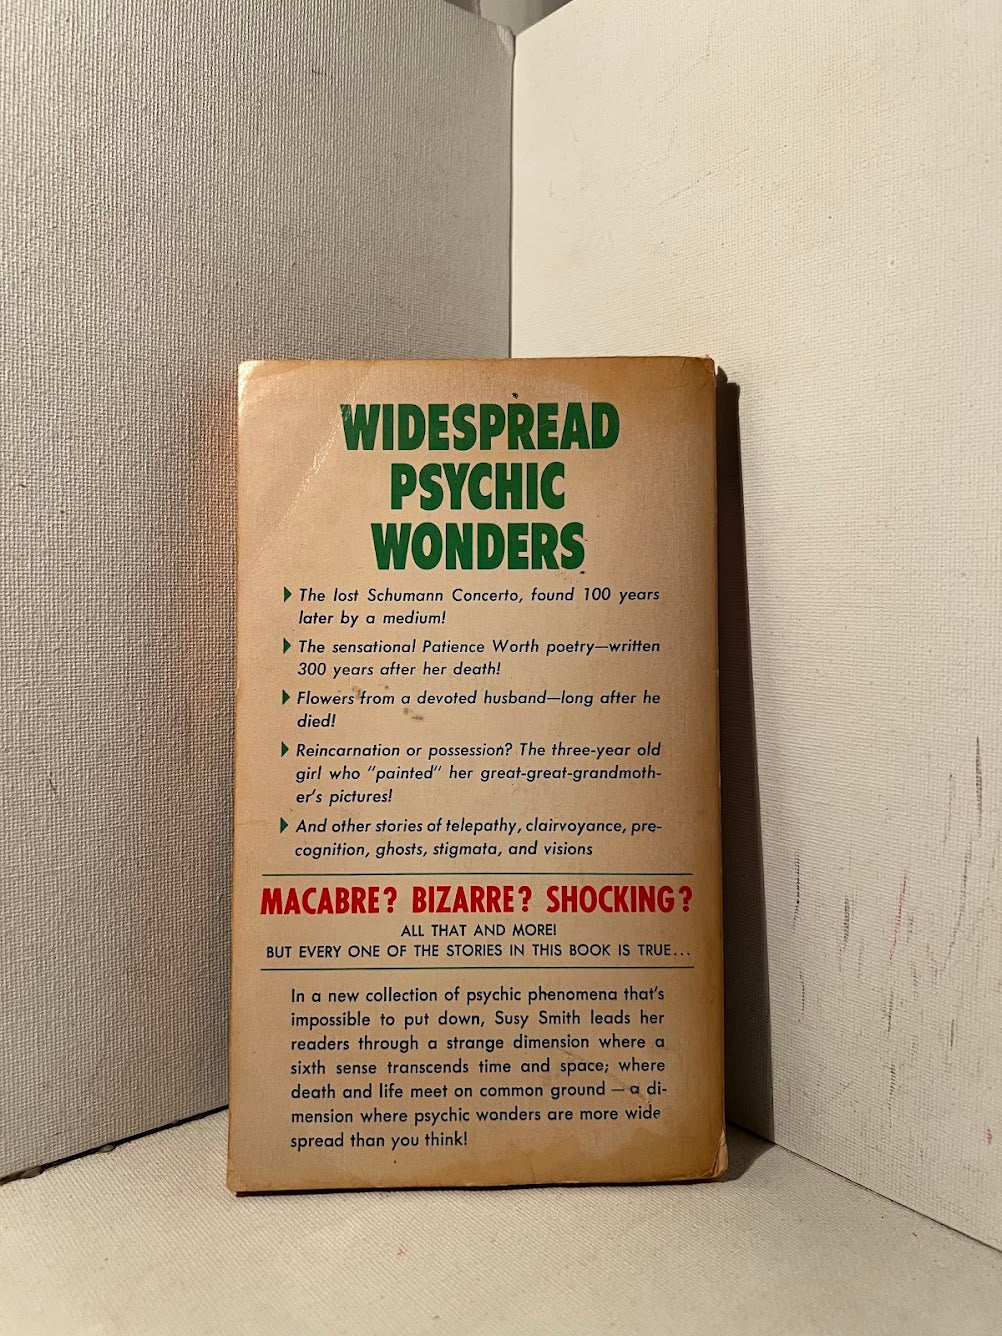 Widespread Psychic Wonders by Susy Smith